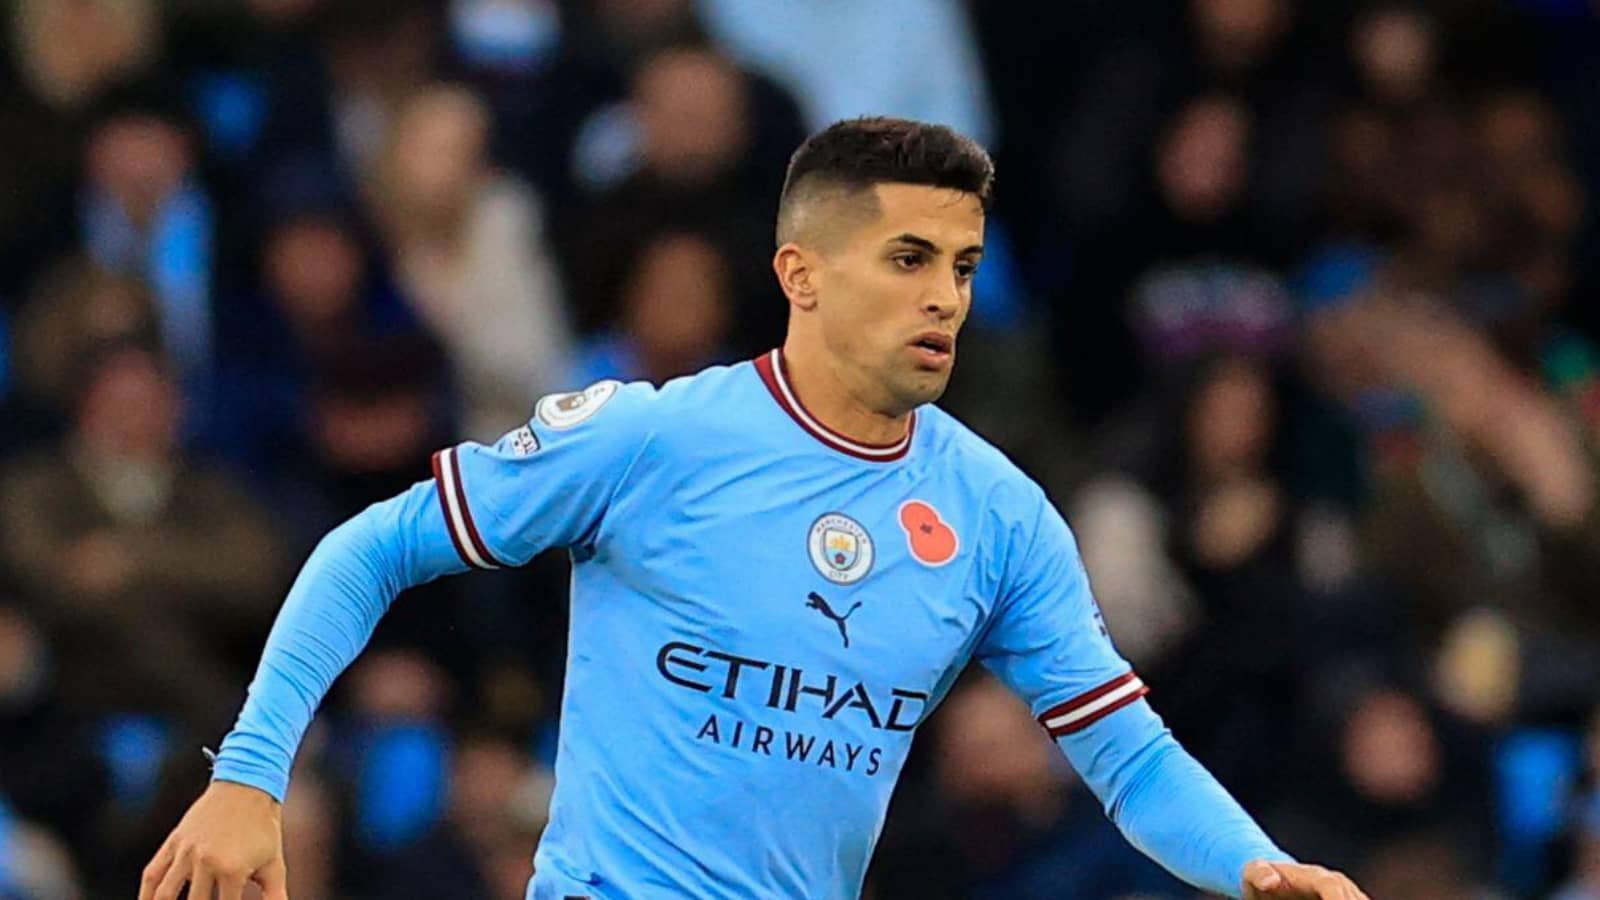 Barcelona and Manchester City reach an agreement over the signing of Joao Cancelo